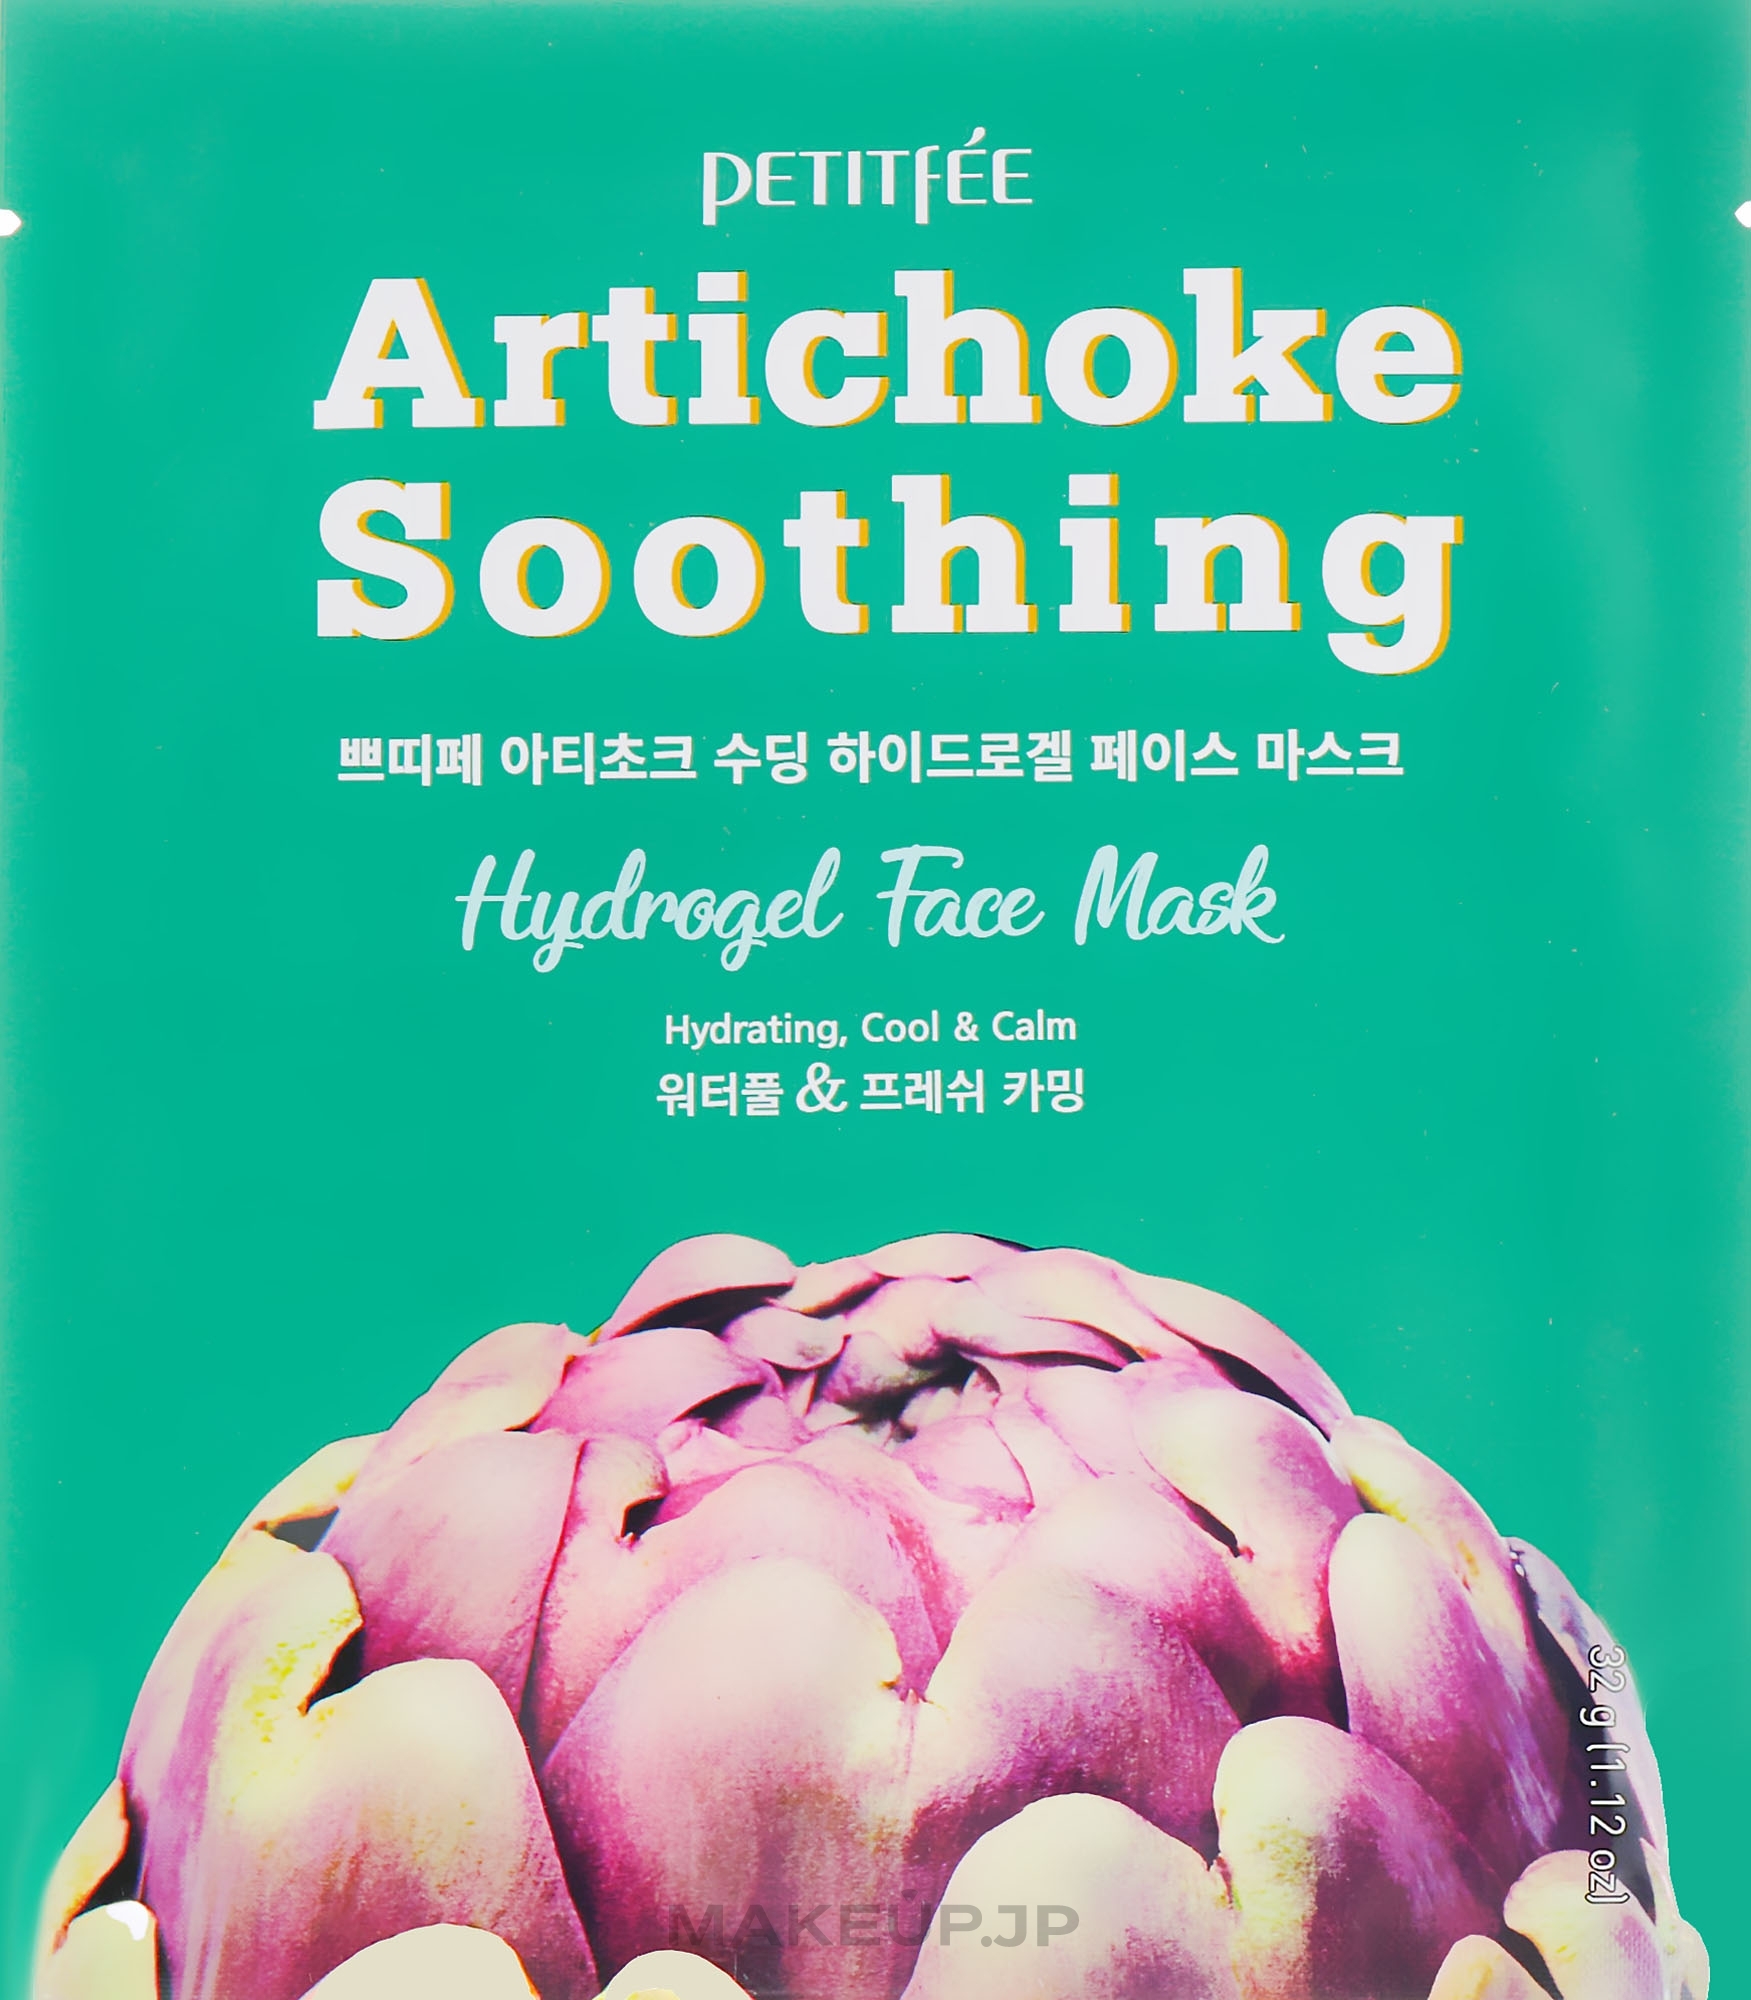 Soothing Hydro Gel Face Mask with Artichoke Extract - Petitfee&Koelf Artichoke Soothing Face Mask — photo 32 g